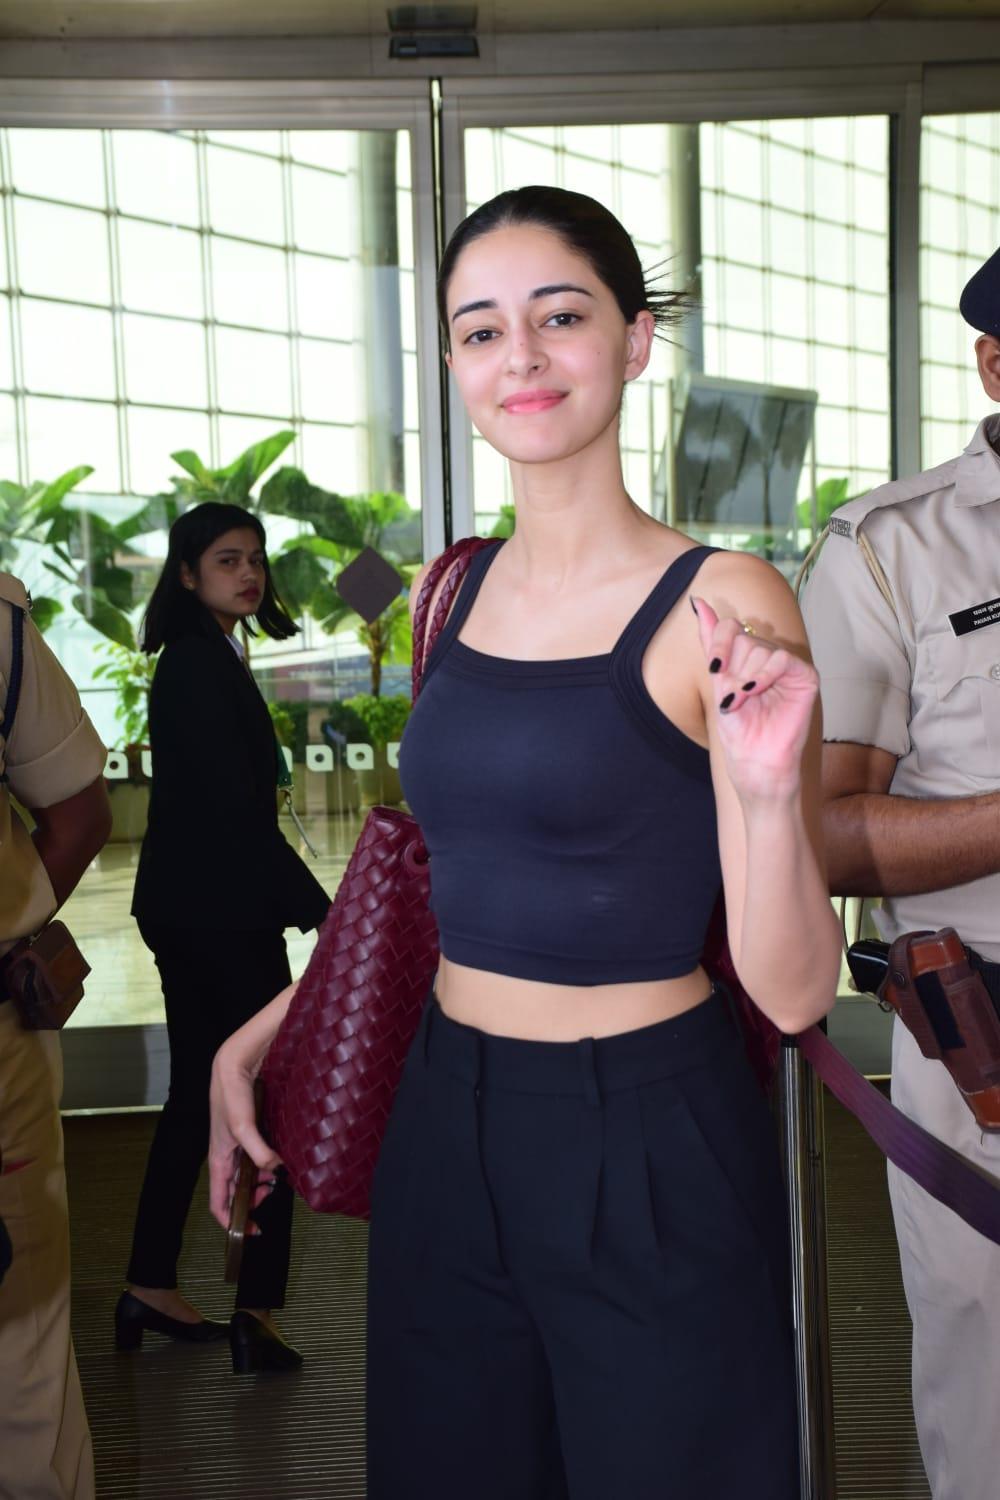 Ananya Panday wore comfy black outfit as she jetted off from the city